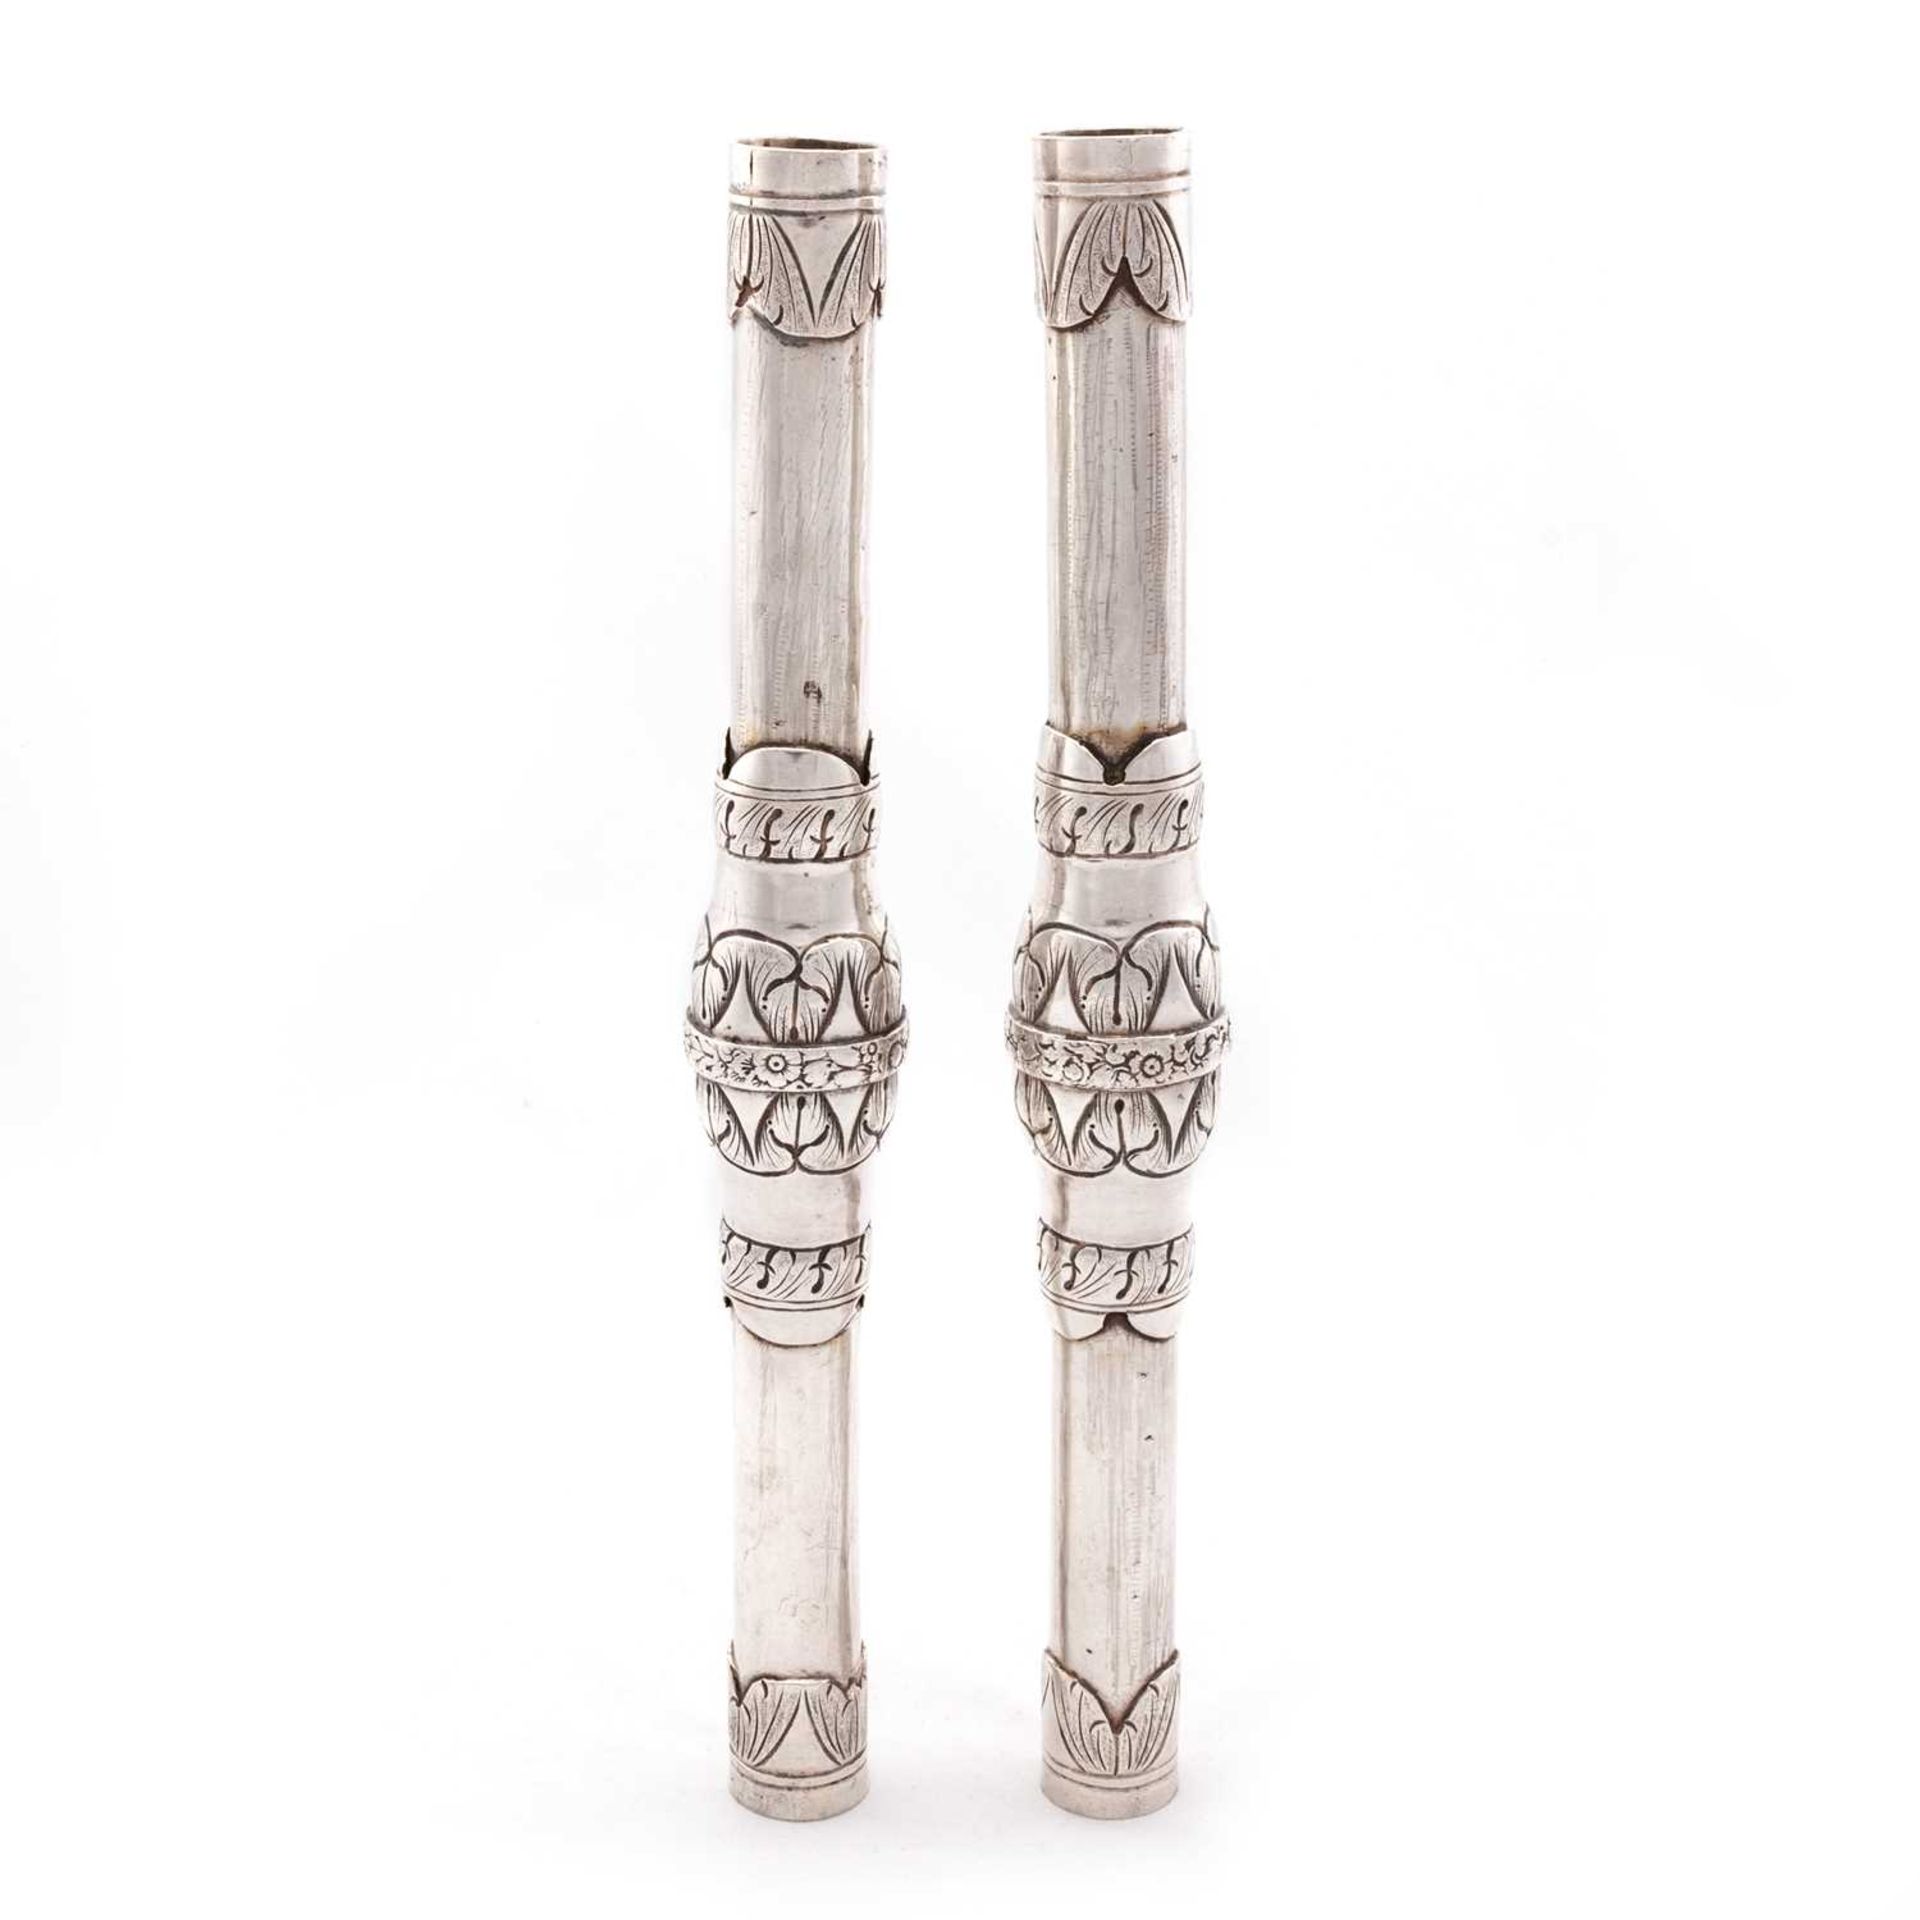 A PAIR OF SPANISH COLONIAL SILVER SCROLL HOLDERS OR CEREMONIAL BATONS - Image 2 of 2